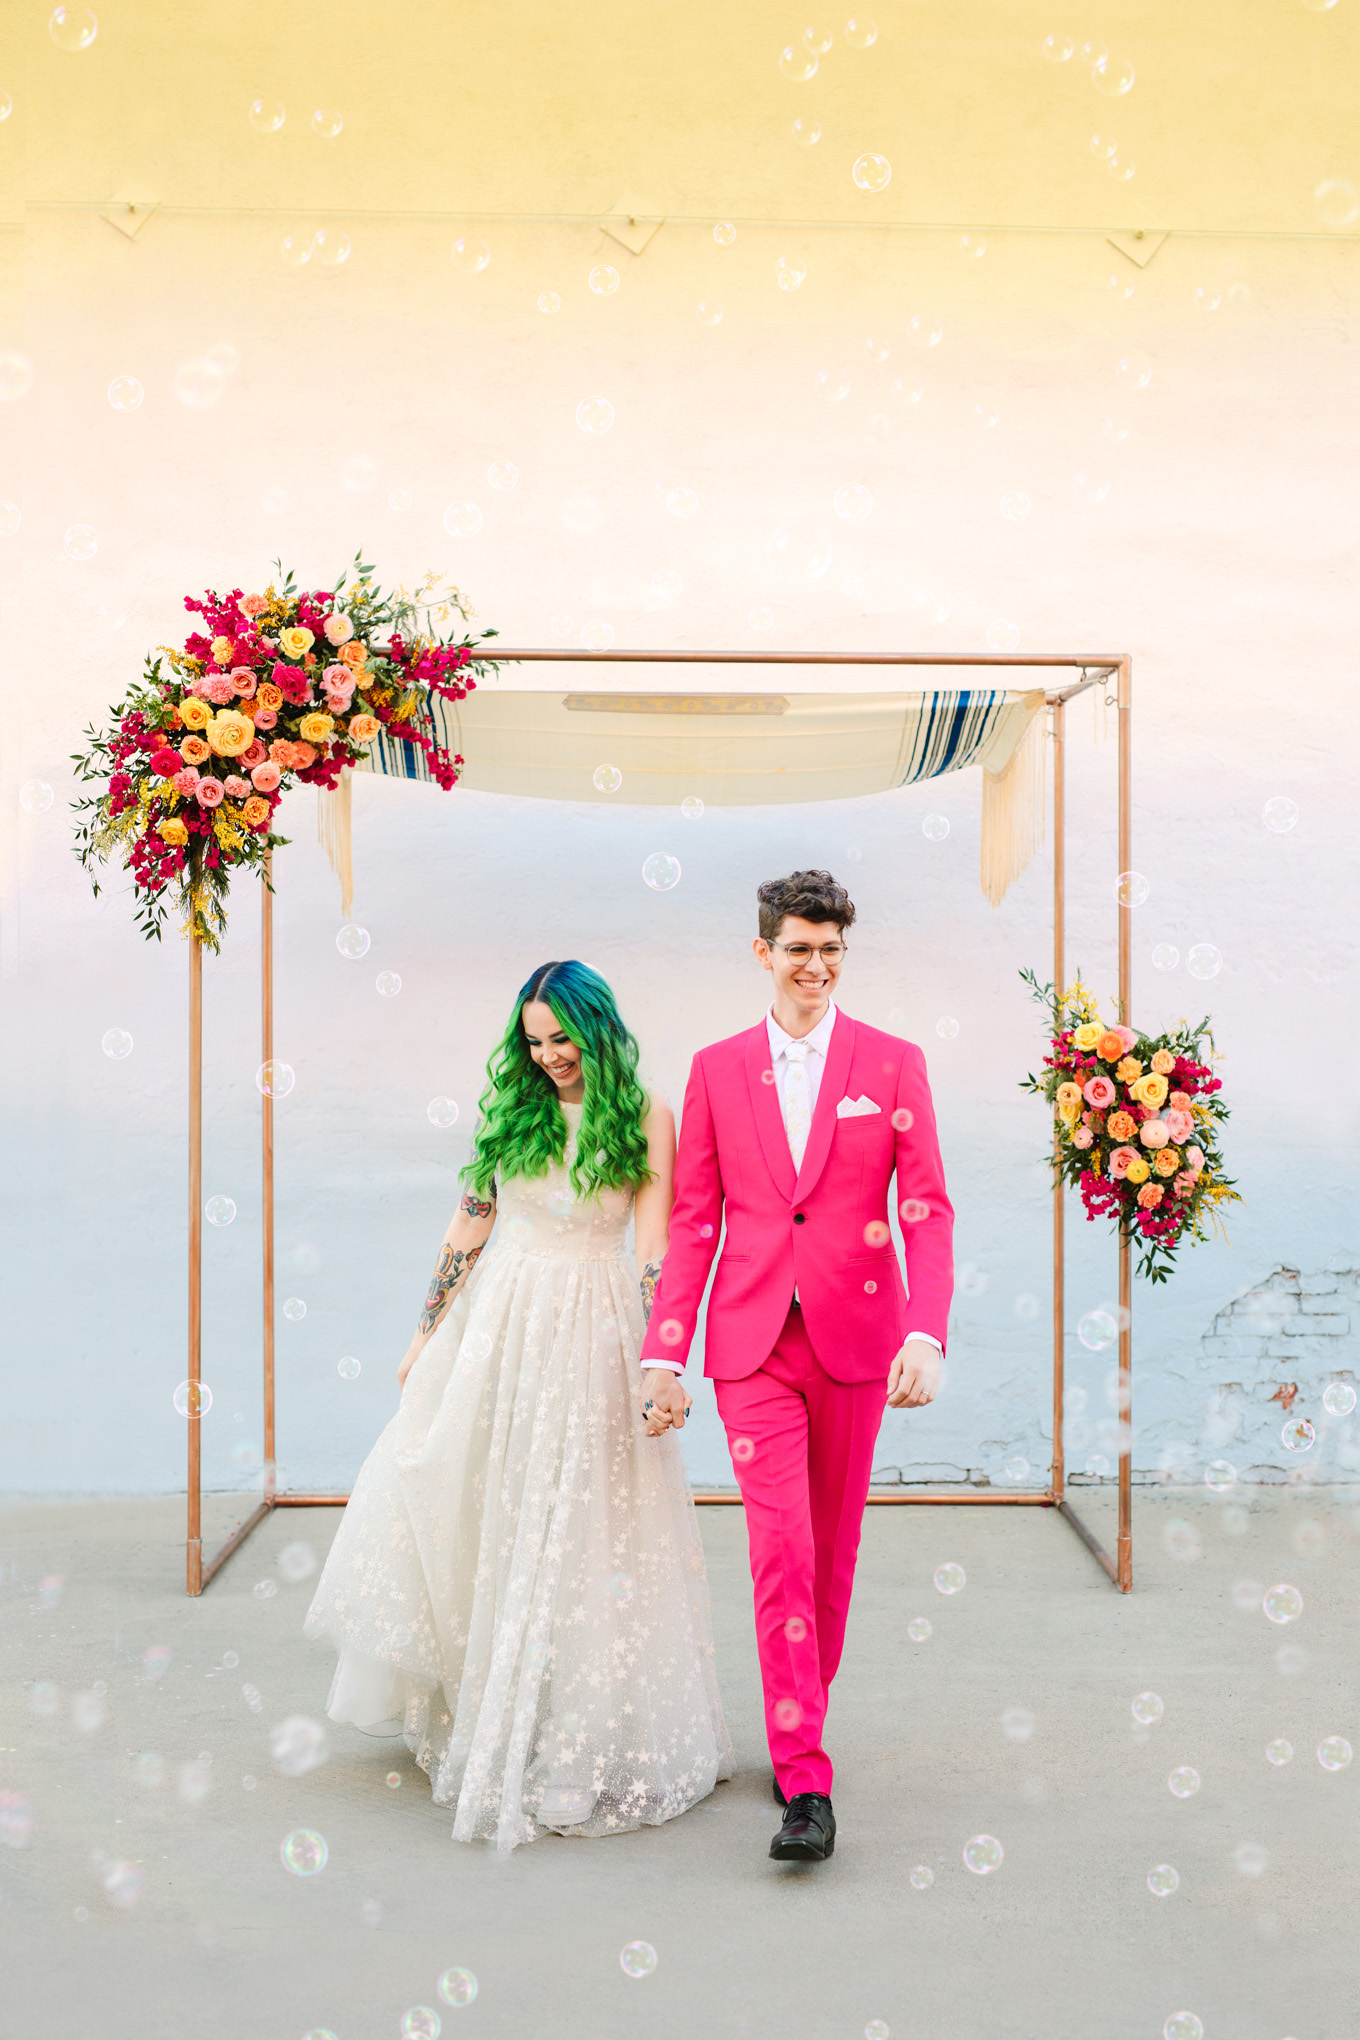 Groom in hot pink suit and bride with green hair in bubble ceremony exit | Colorful wedding at The Unique Space Los Angeles published in The Knot Magazine | Fresh and colorful photography for fun-loving couples in Southern California | #colorfulwedding #losangeleswedding #weddingphotography #uniquespace Source: Mary Costa Photography | Los Angeles